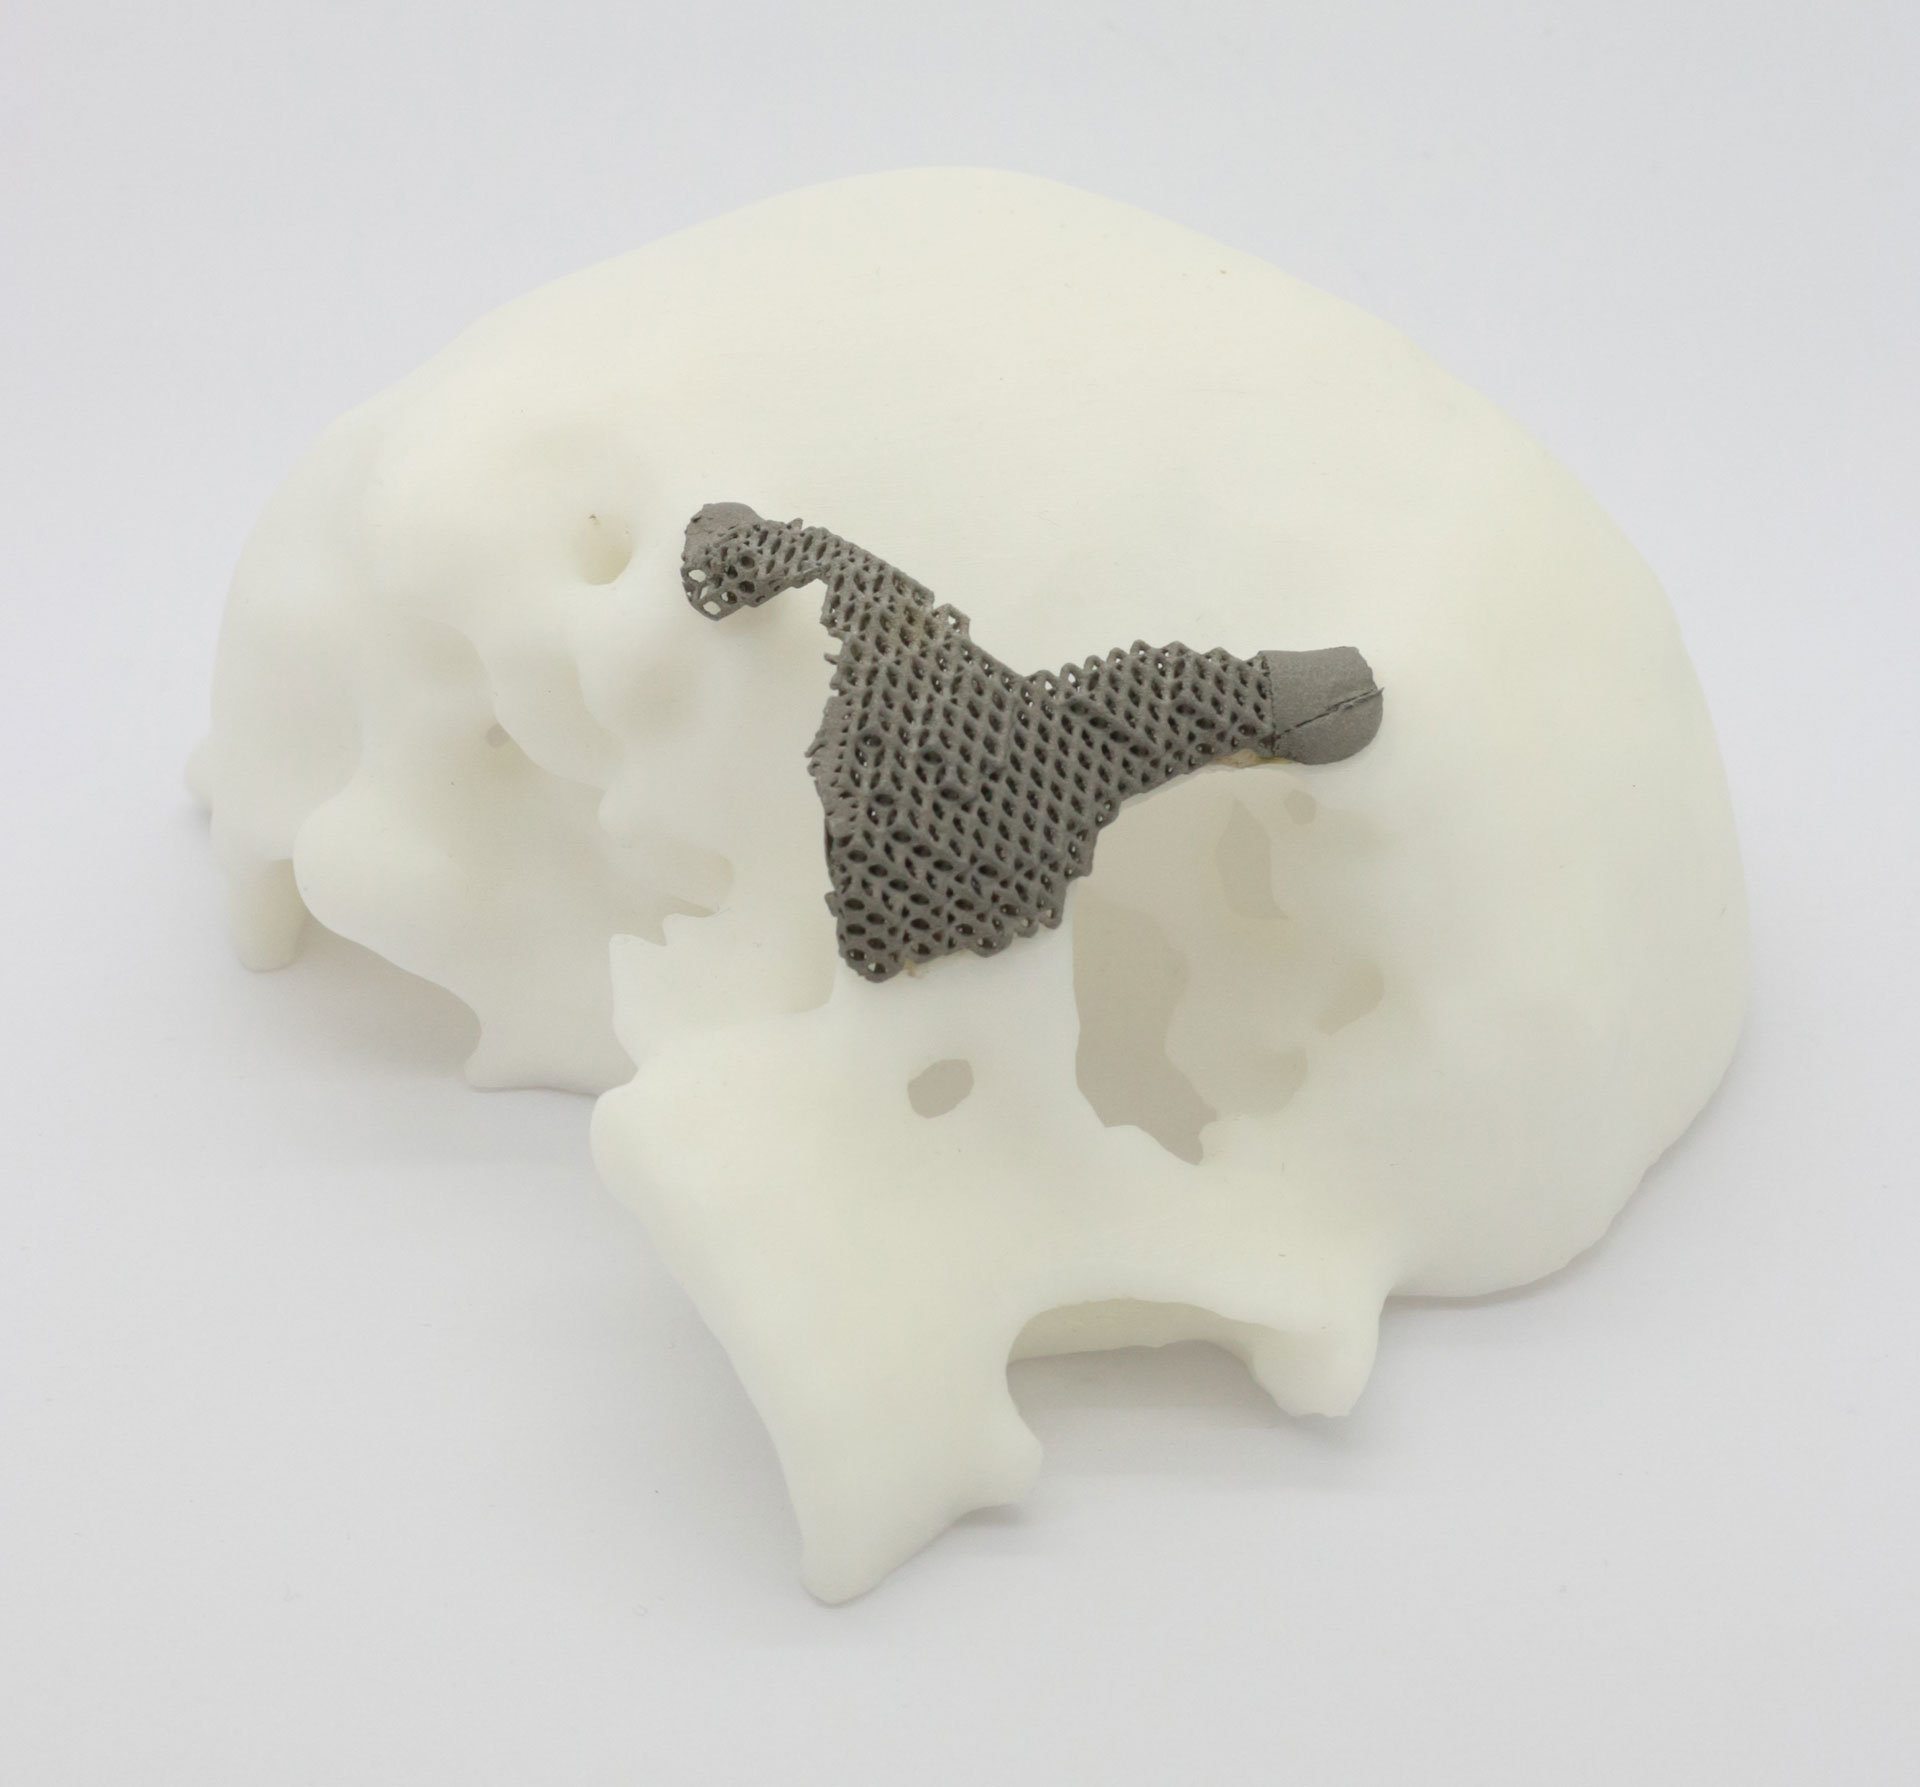 Model of the human skull with an additively manufactured implant of the zygomatic bone and part of the temporal bone